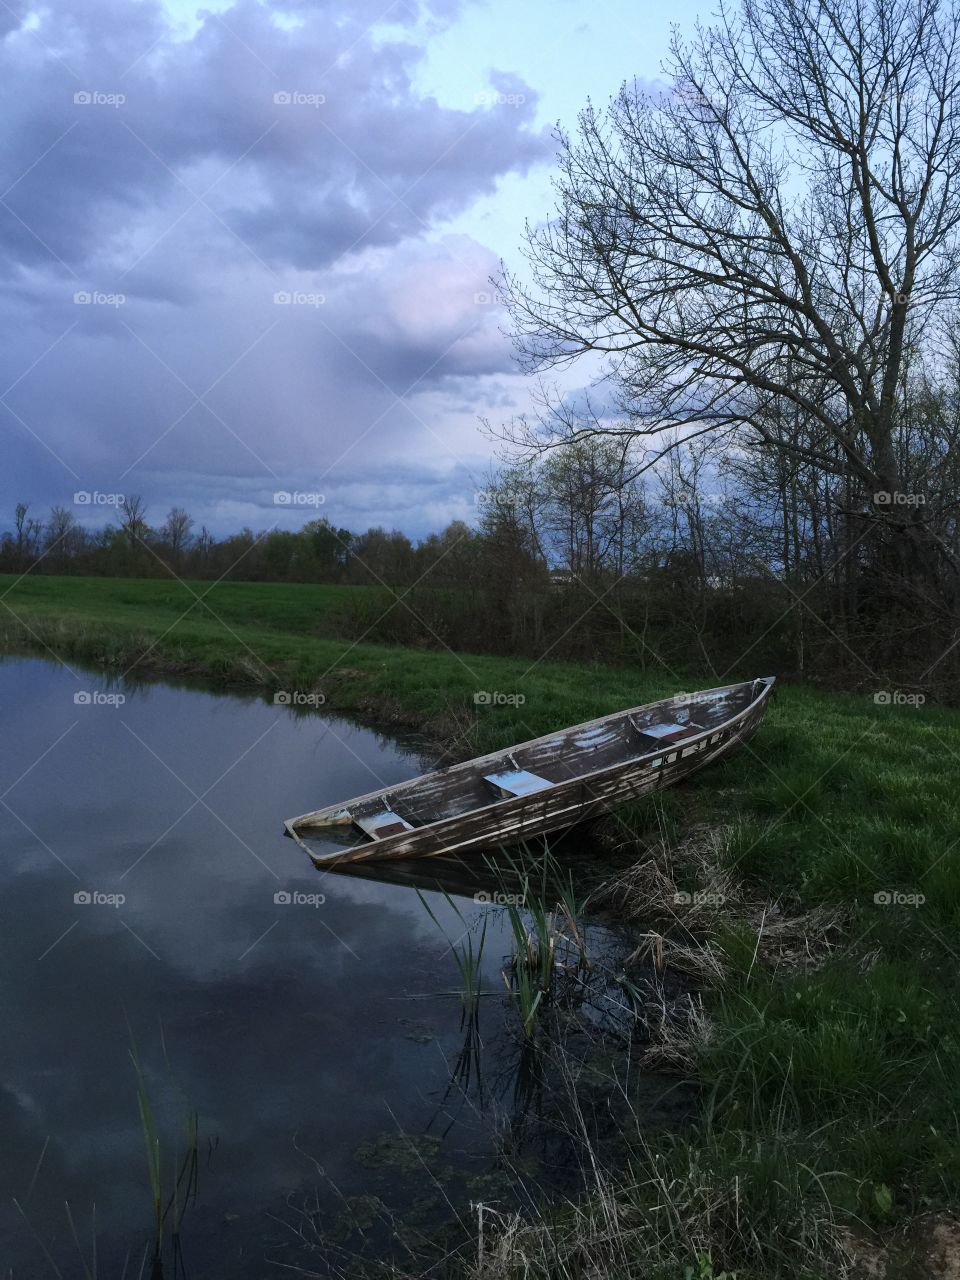 Weathered boat in lake